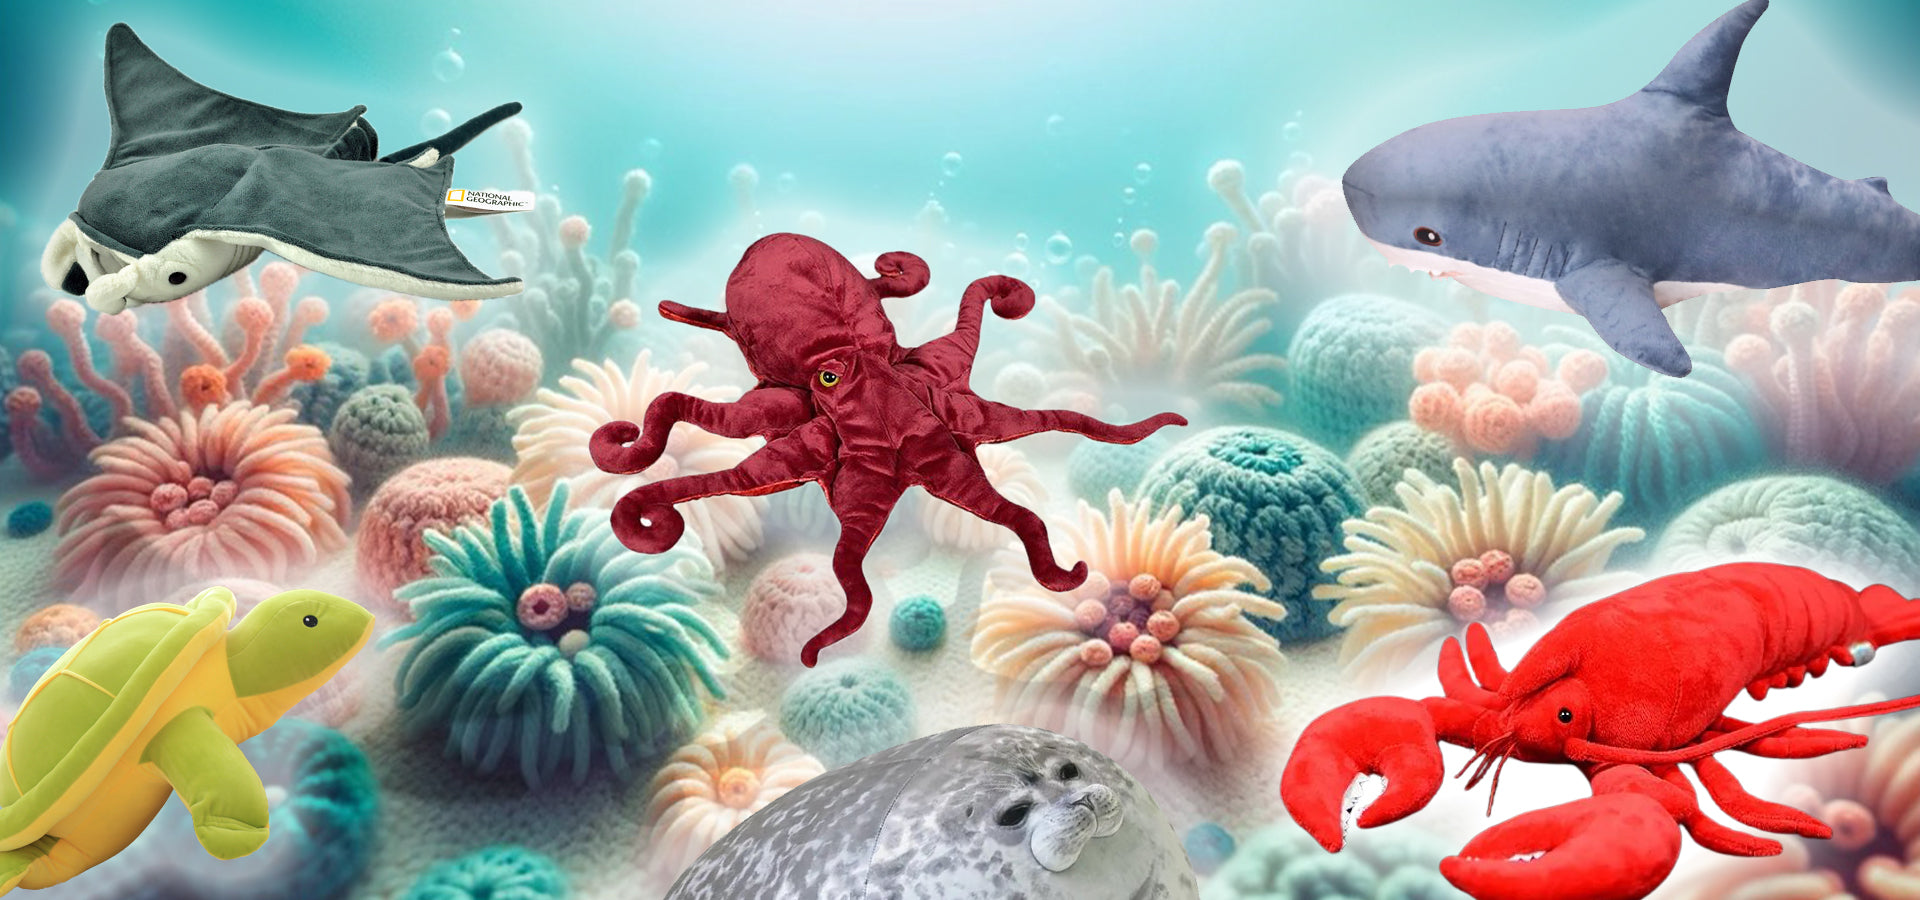 Plushtery Ocean Creatures Collection Banner